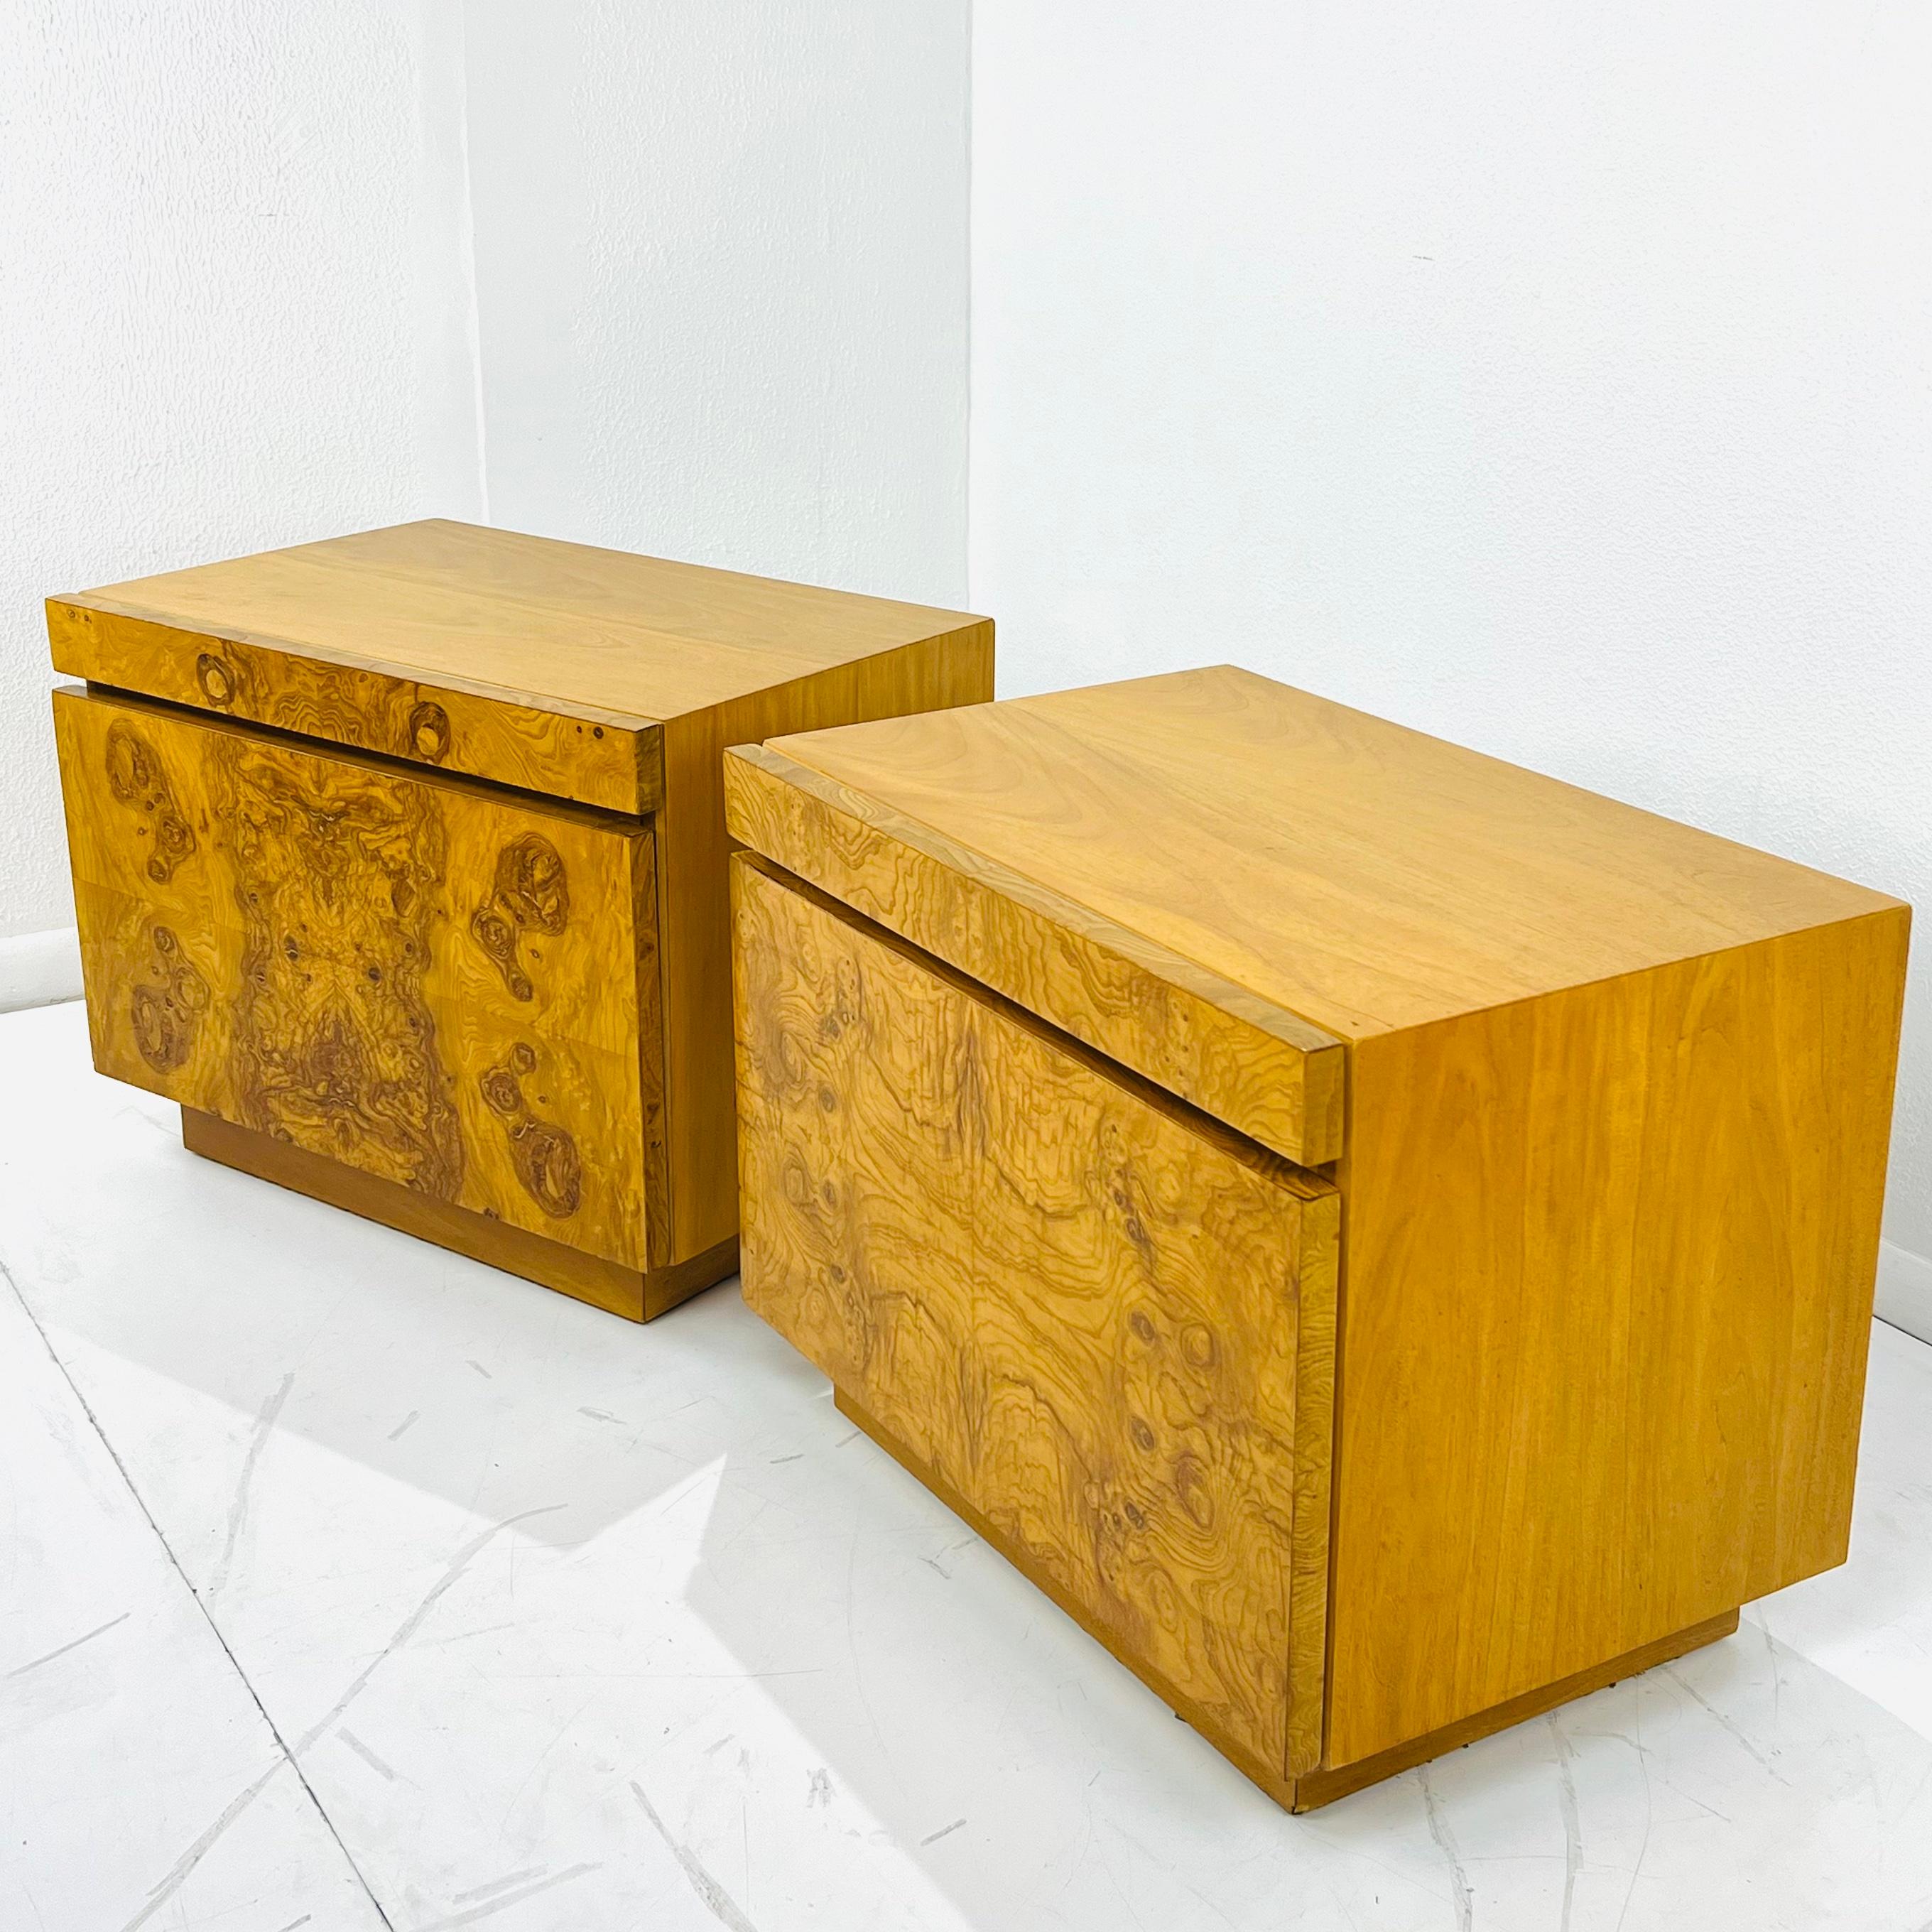 Pair of Burl Wood Nightstands by Milo Baughman for Lane In Good Condition For Sale In Dallas, TX